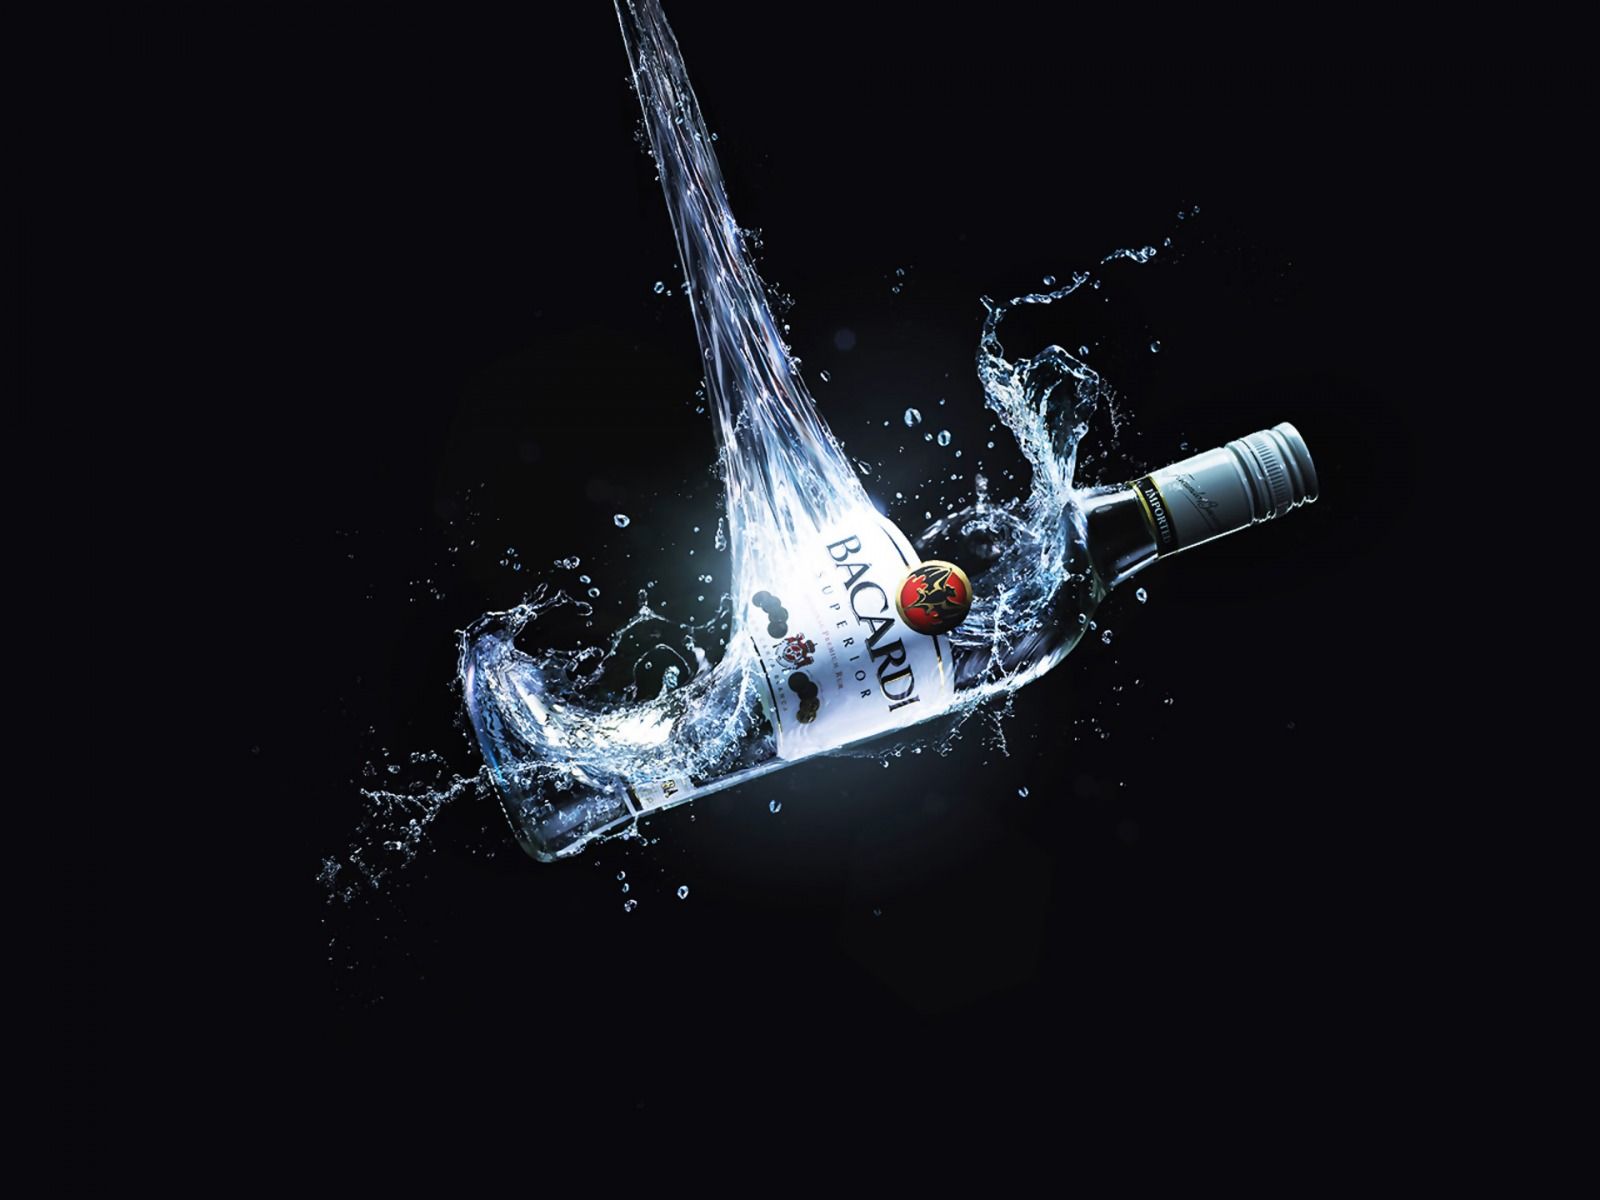 Alcohol and Drugs Background. Alcohol Wallpaper, Girly Alcohol Wallpaper and Alcohol Wallpaper